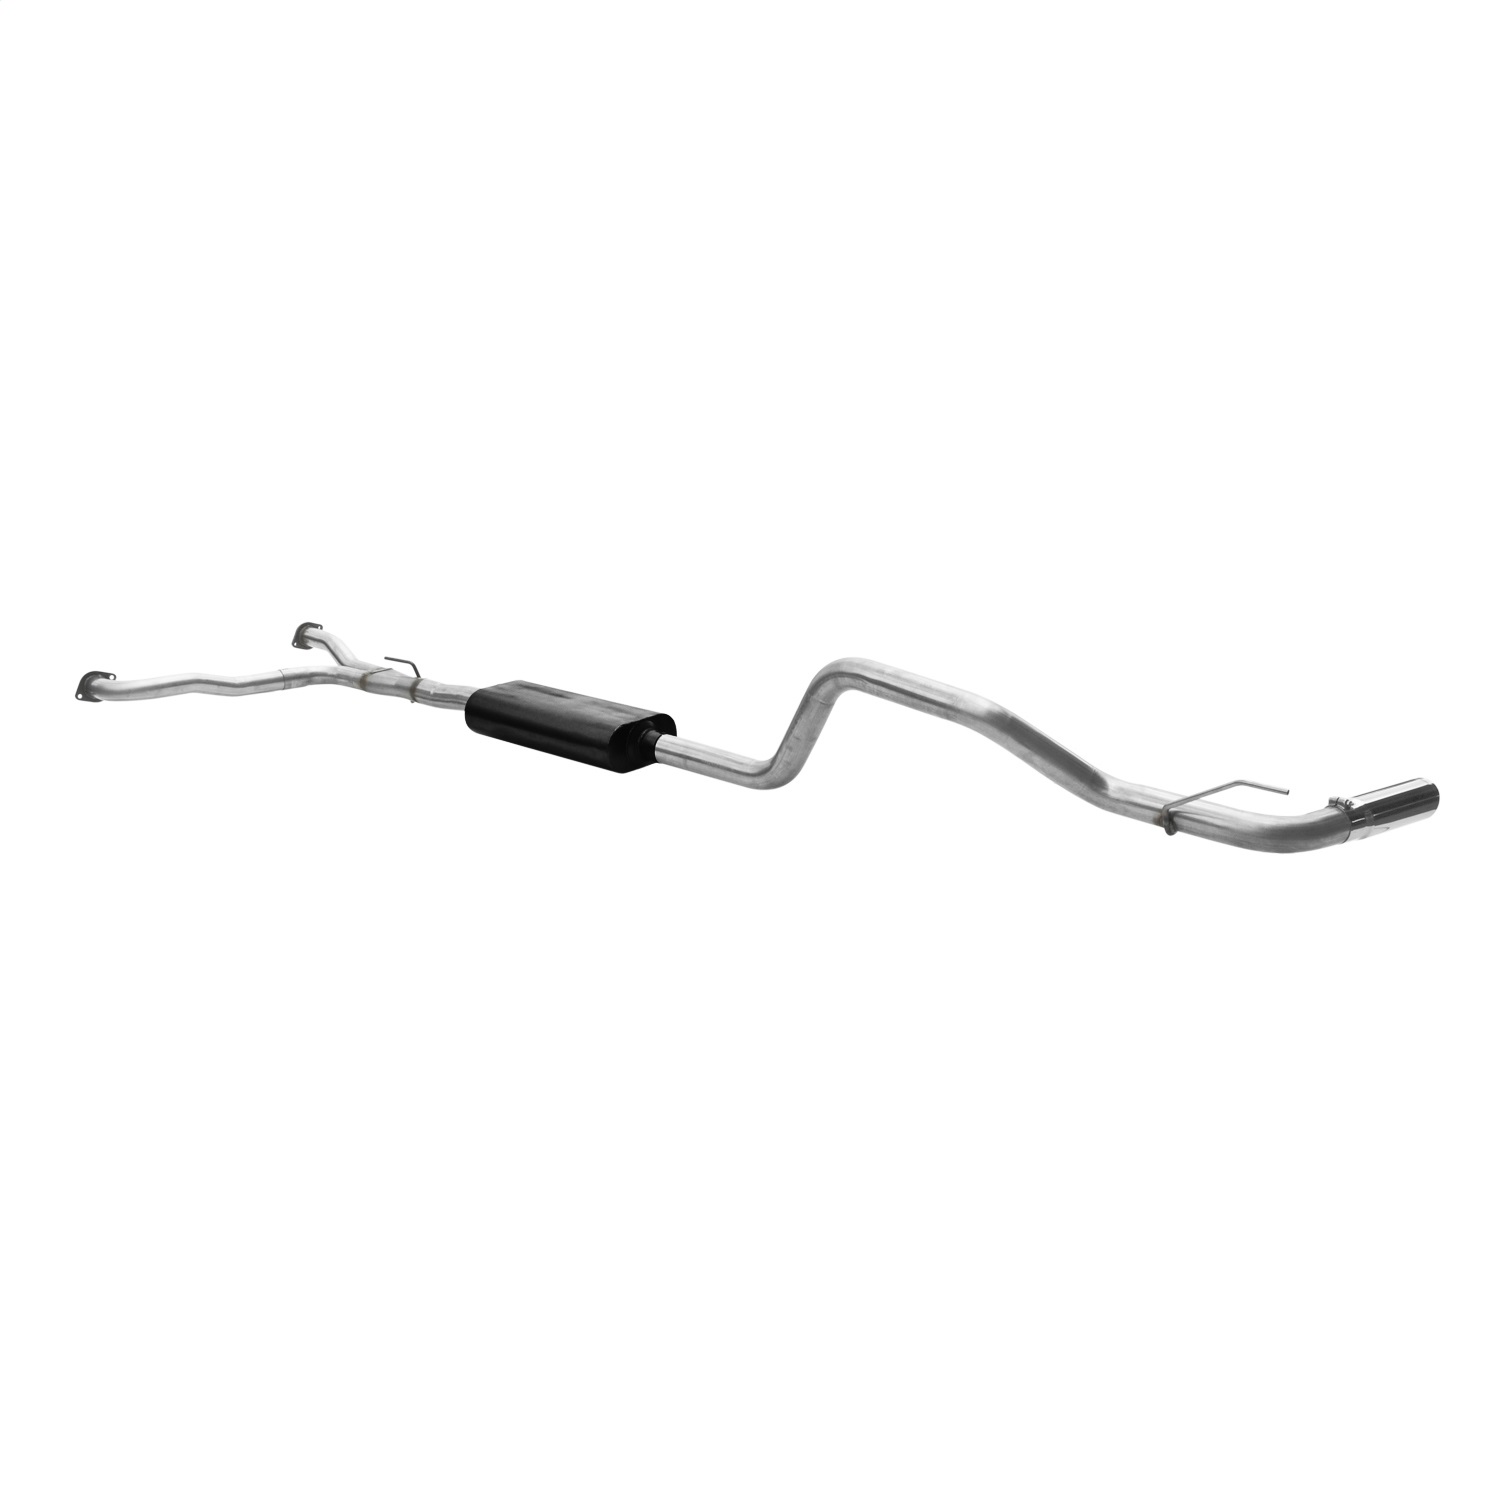 Flowmaster Flowmaster 817533 American Thunder Cat Back Exhaust System Fits 04-15 Titan